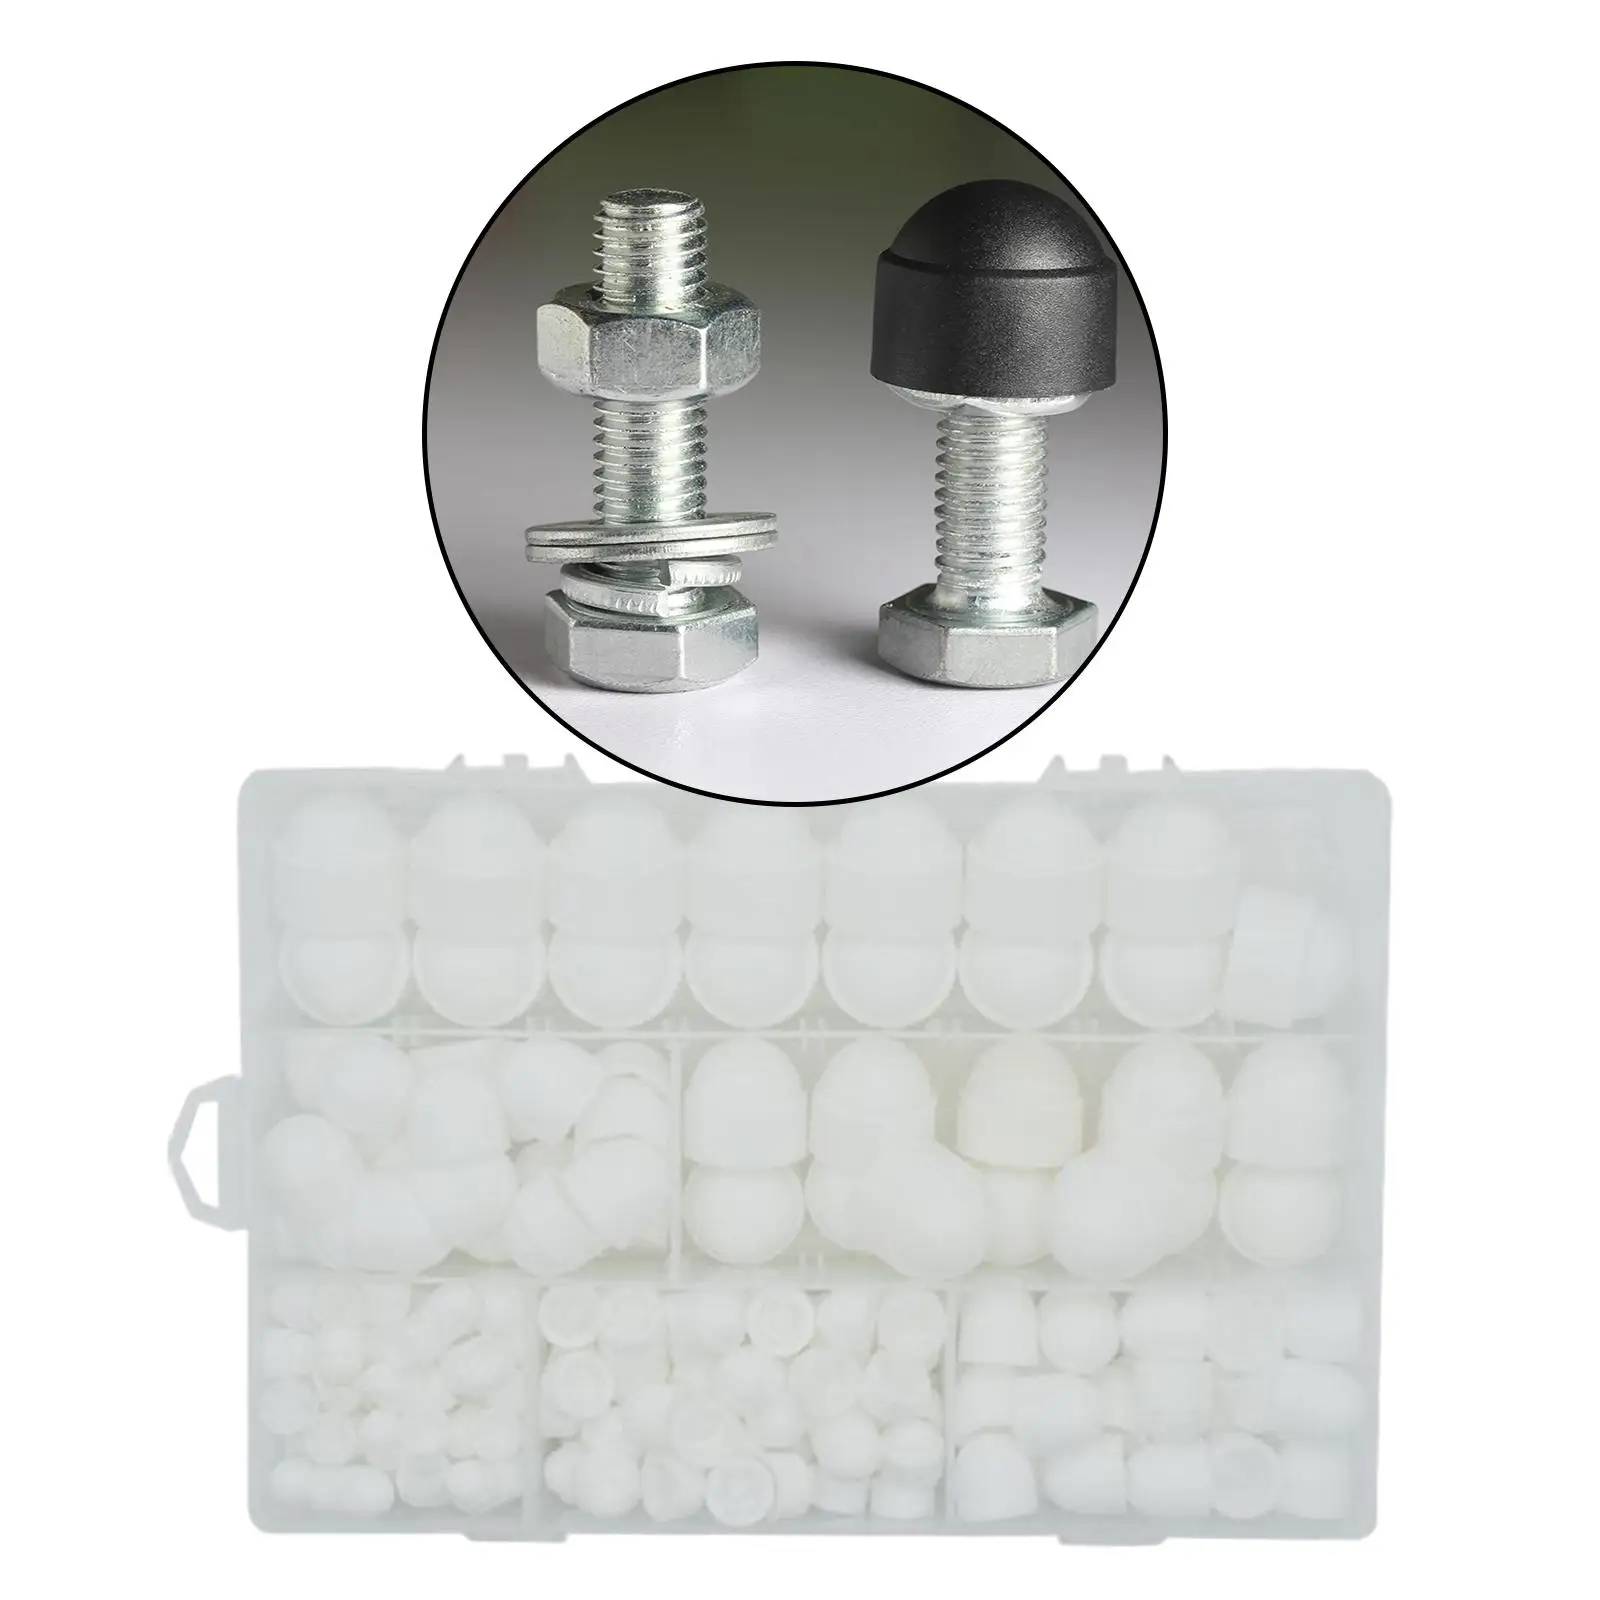 145x - Hexagon Nut Protection Cap Cover Screw Cover Caps Assortment Kits with Storage Box White High Performance